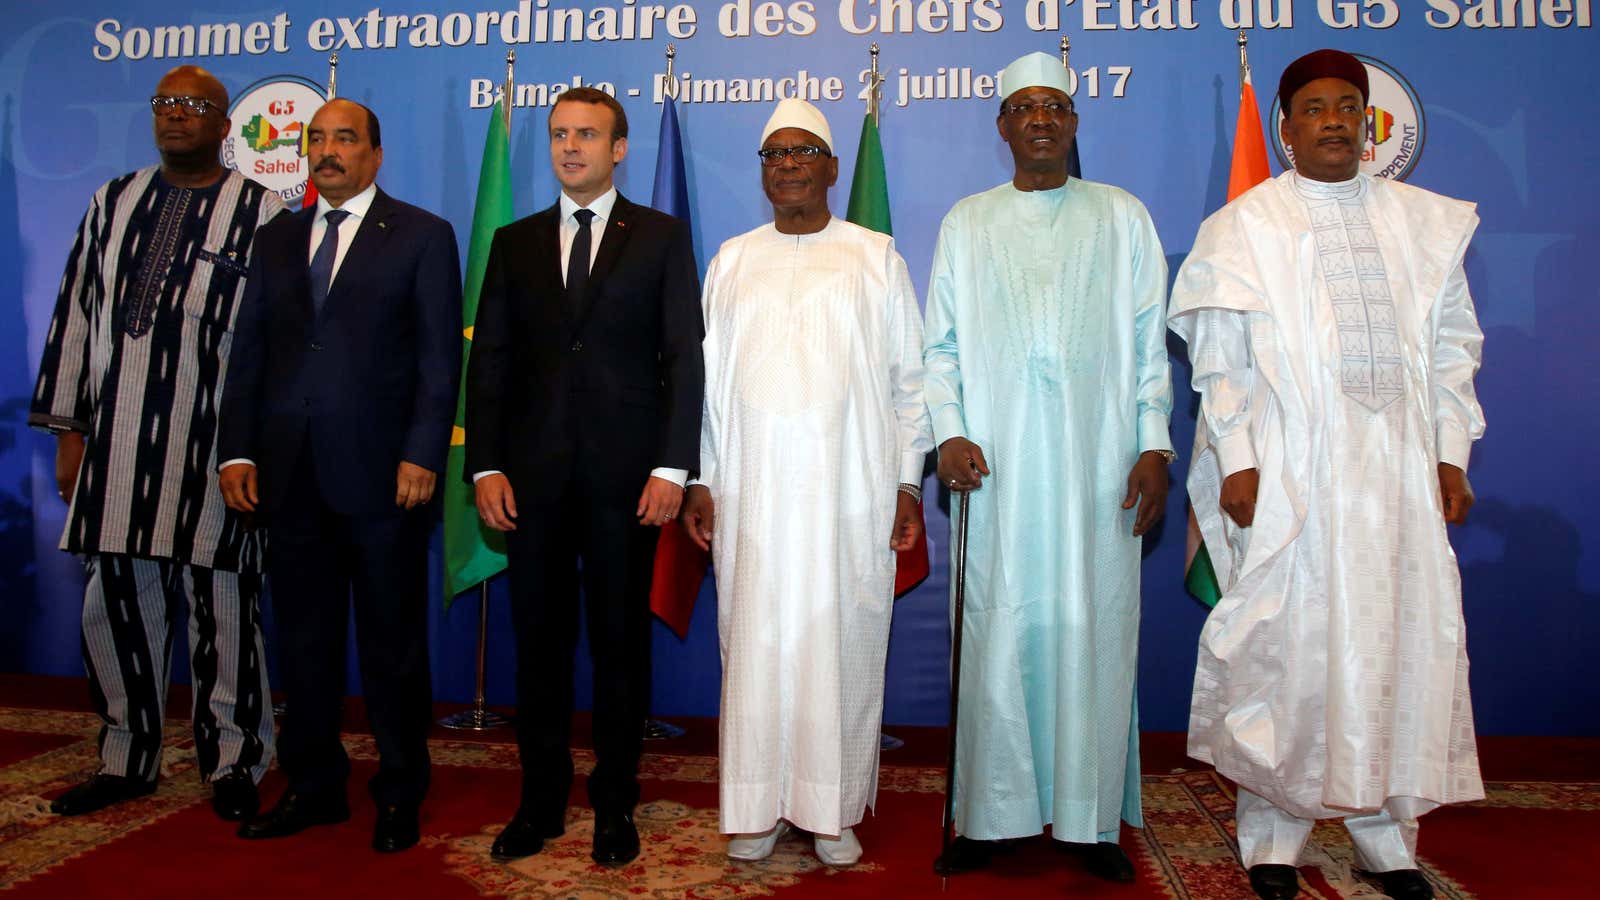 Macron with the presidents of Burkina Faso, Mauritania, Mali, Chad and Niger during the G5 Sahel Summit in Bamako on July 2.